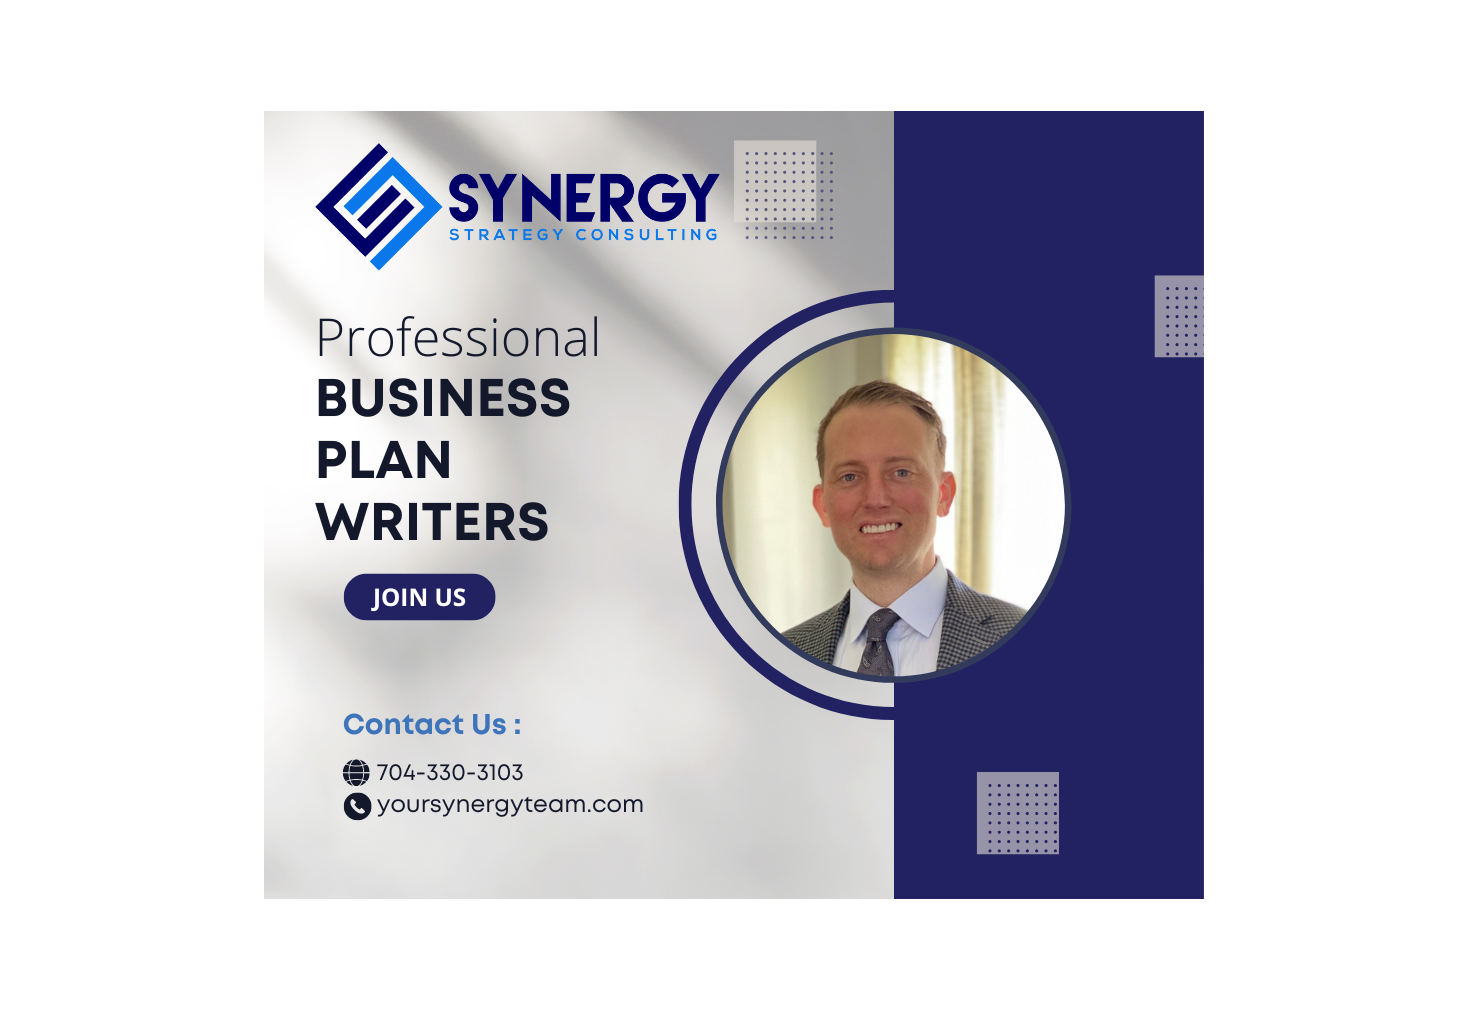 Proven Business Plan - Synergy Strategy Consulting